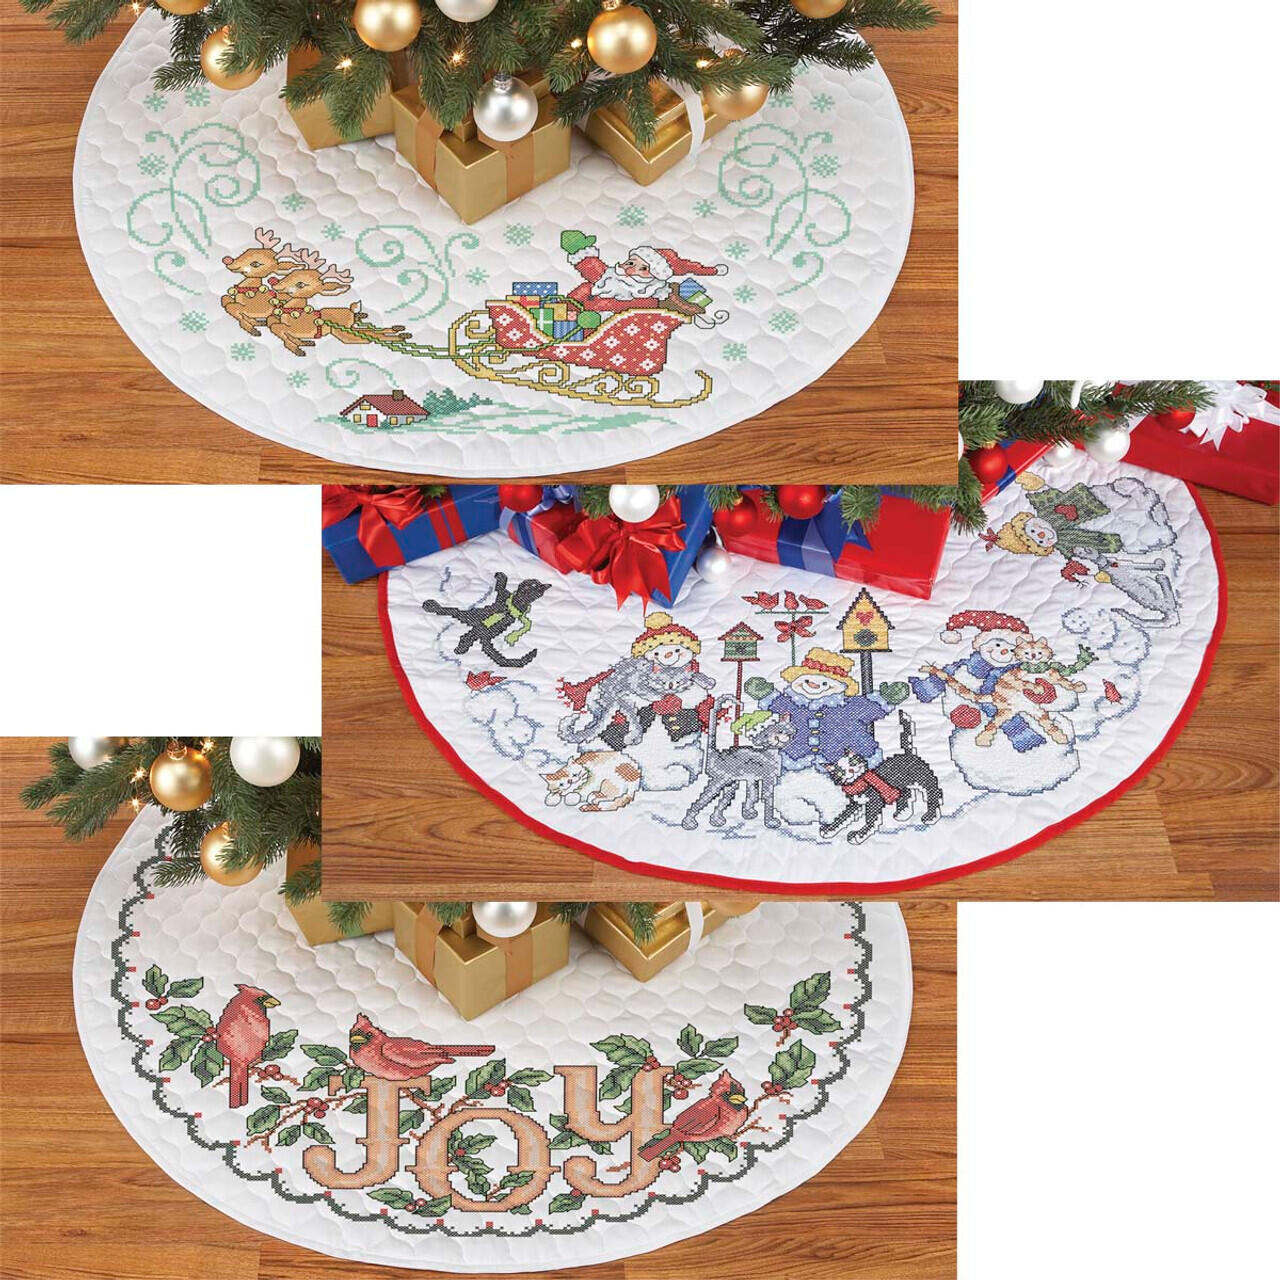 Handmade Lot Of 5 Needlepoint Counted Cross Stitch Christmas Ornaments  Unique!